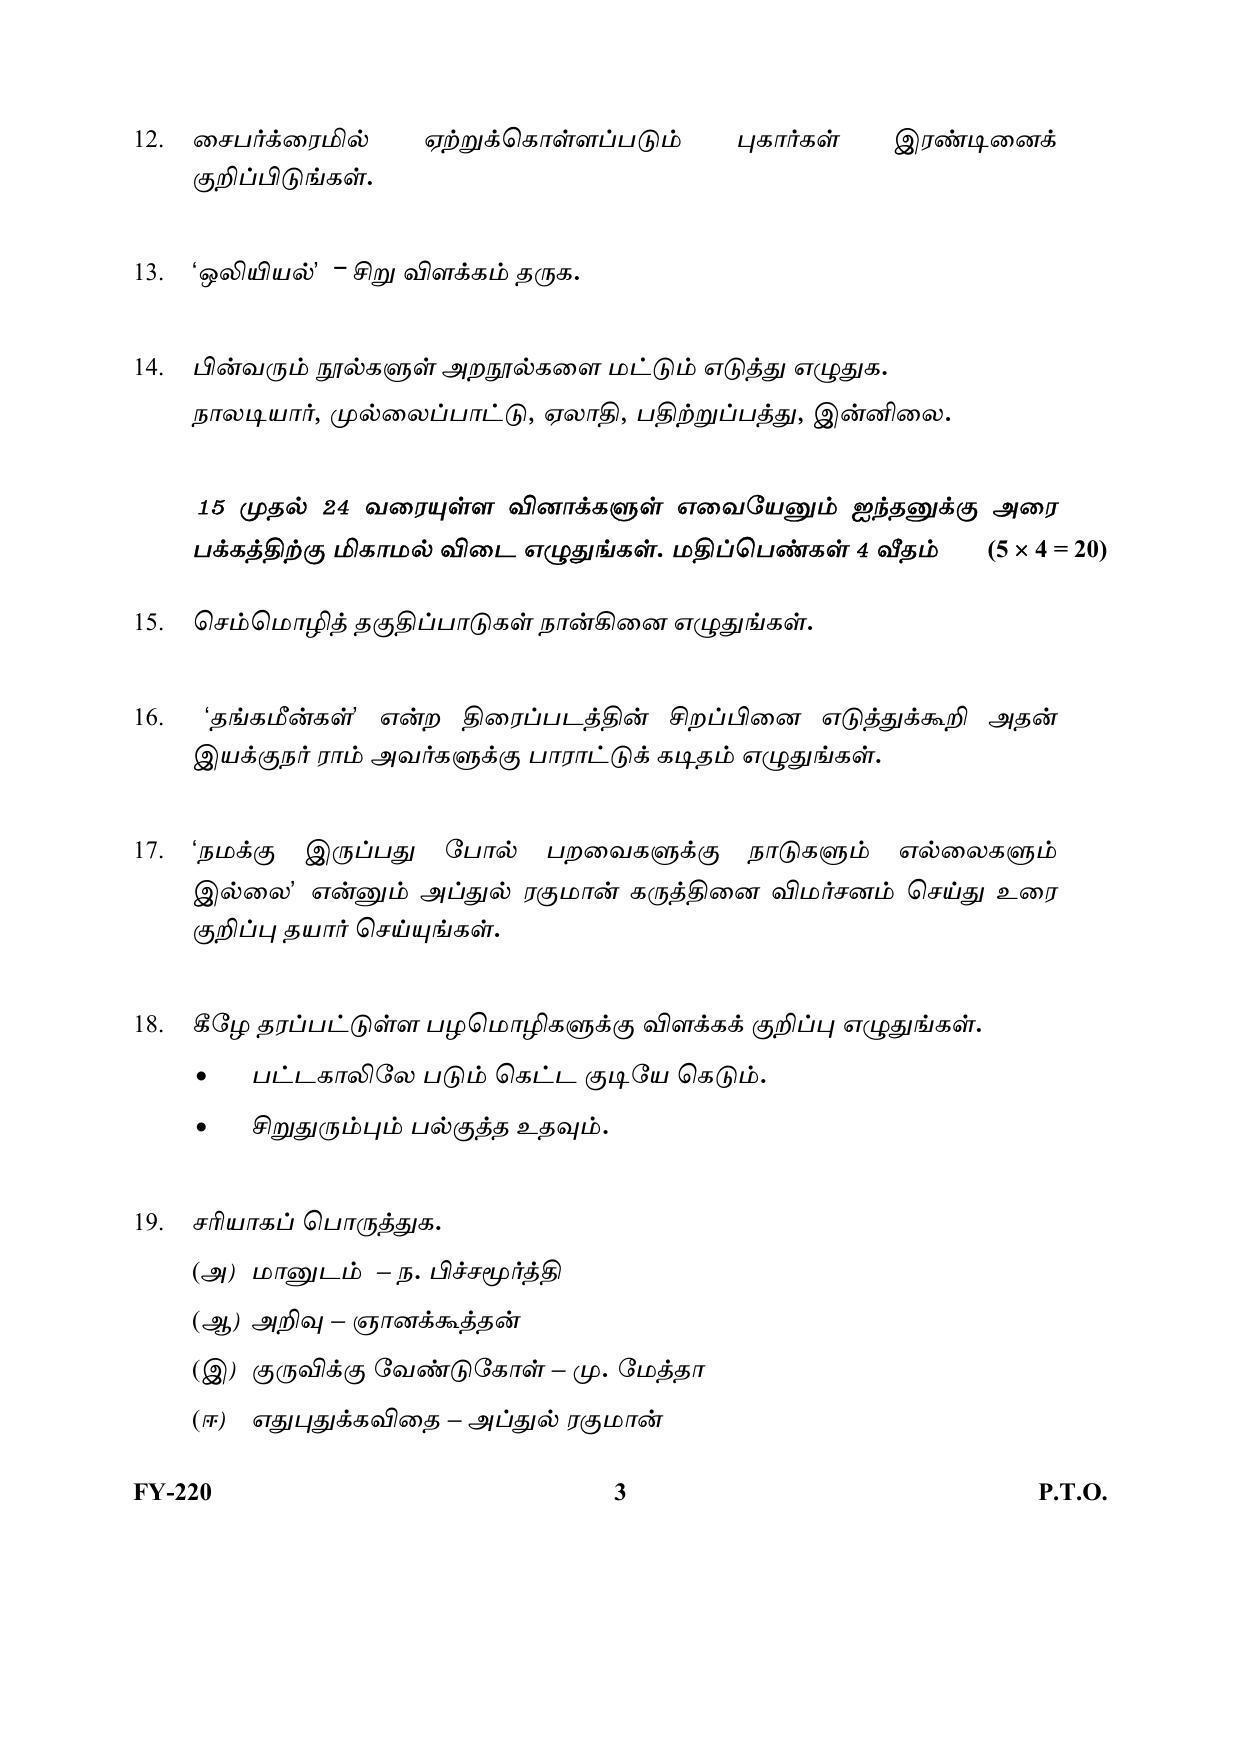 Kerala Plus One (Class 11th) Part-III Tamil-Optional Question Paper 2021 - Page 3